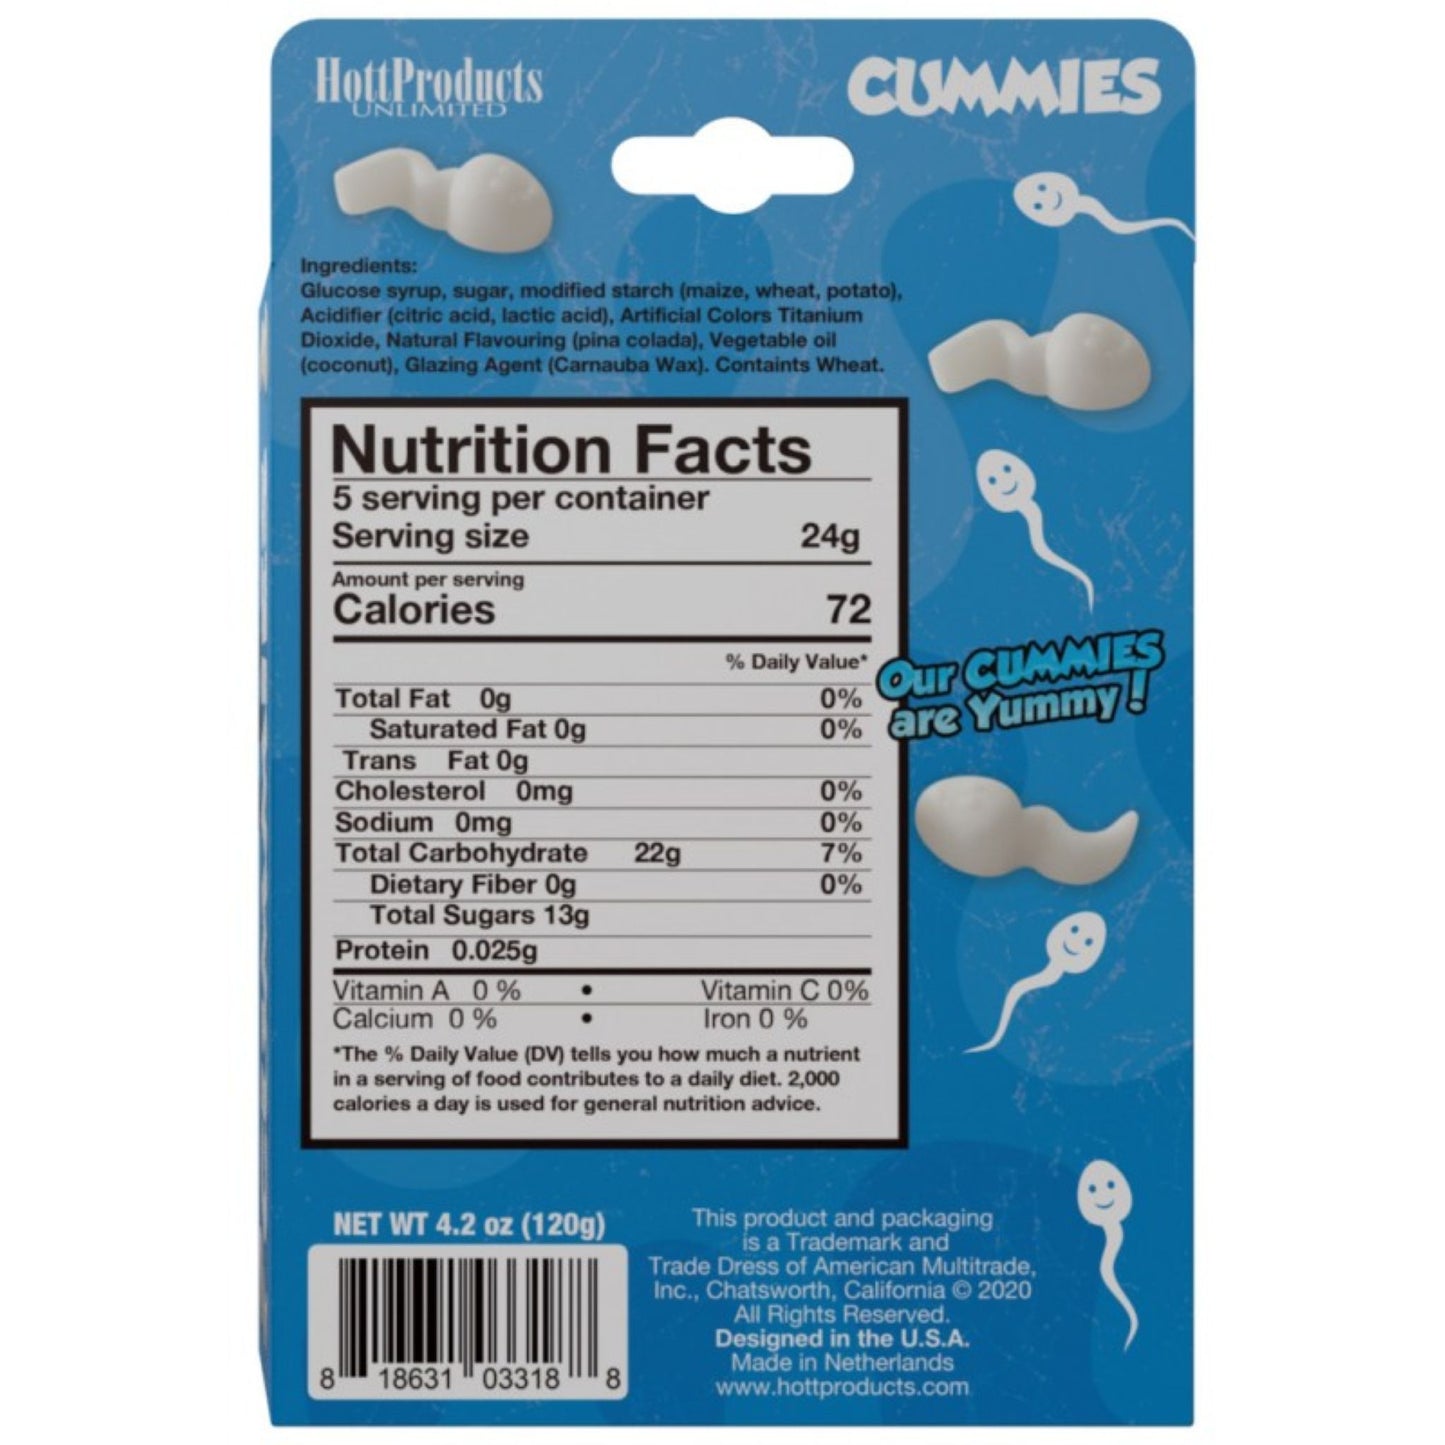 Hott Products Cummies Gummies back of box nutrition facts.